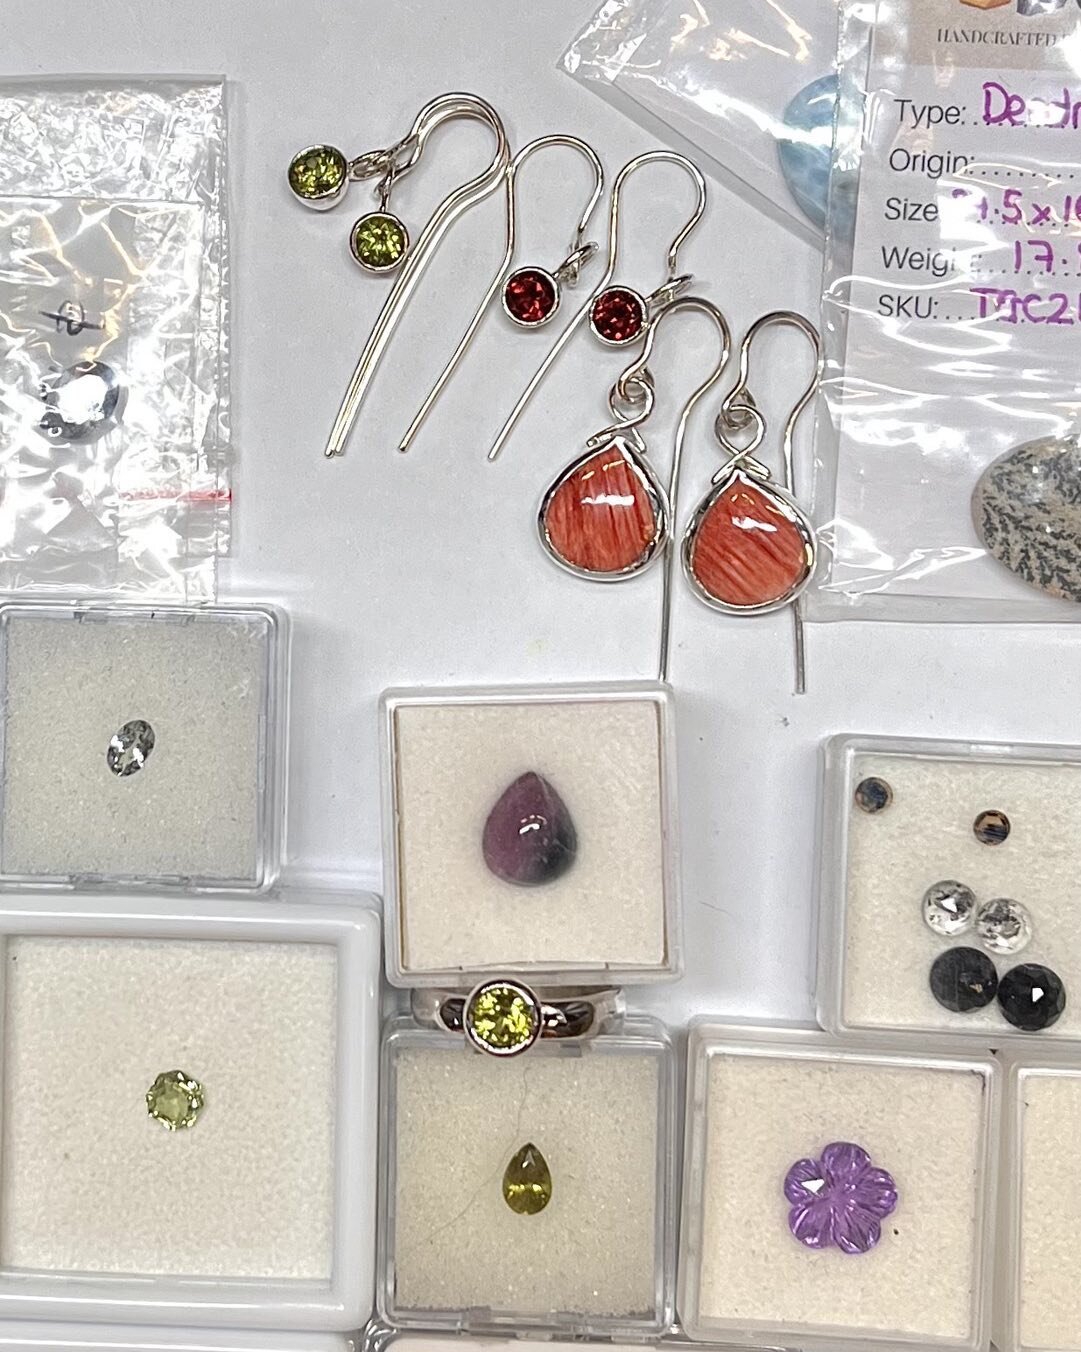 Hey, hey  Saturday is coming 😃I&rsquo;ll be there with my stall and have some new things made for you at my temporary bench amongst the packing boxes and the big country spiders🕷️😮😩😂. Got some lovey Aussie gems for you SA peridot, earrings and r